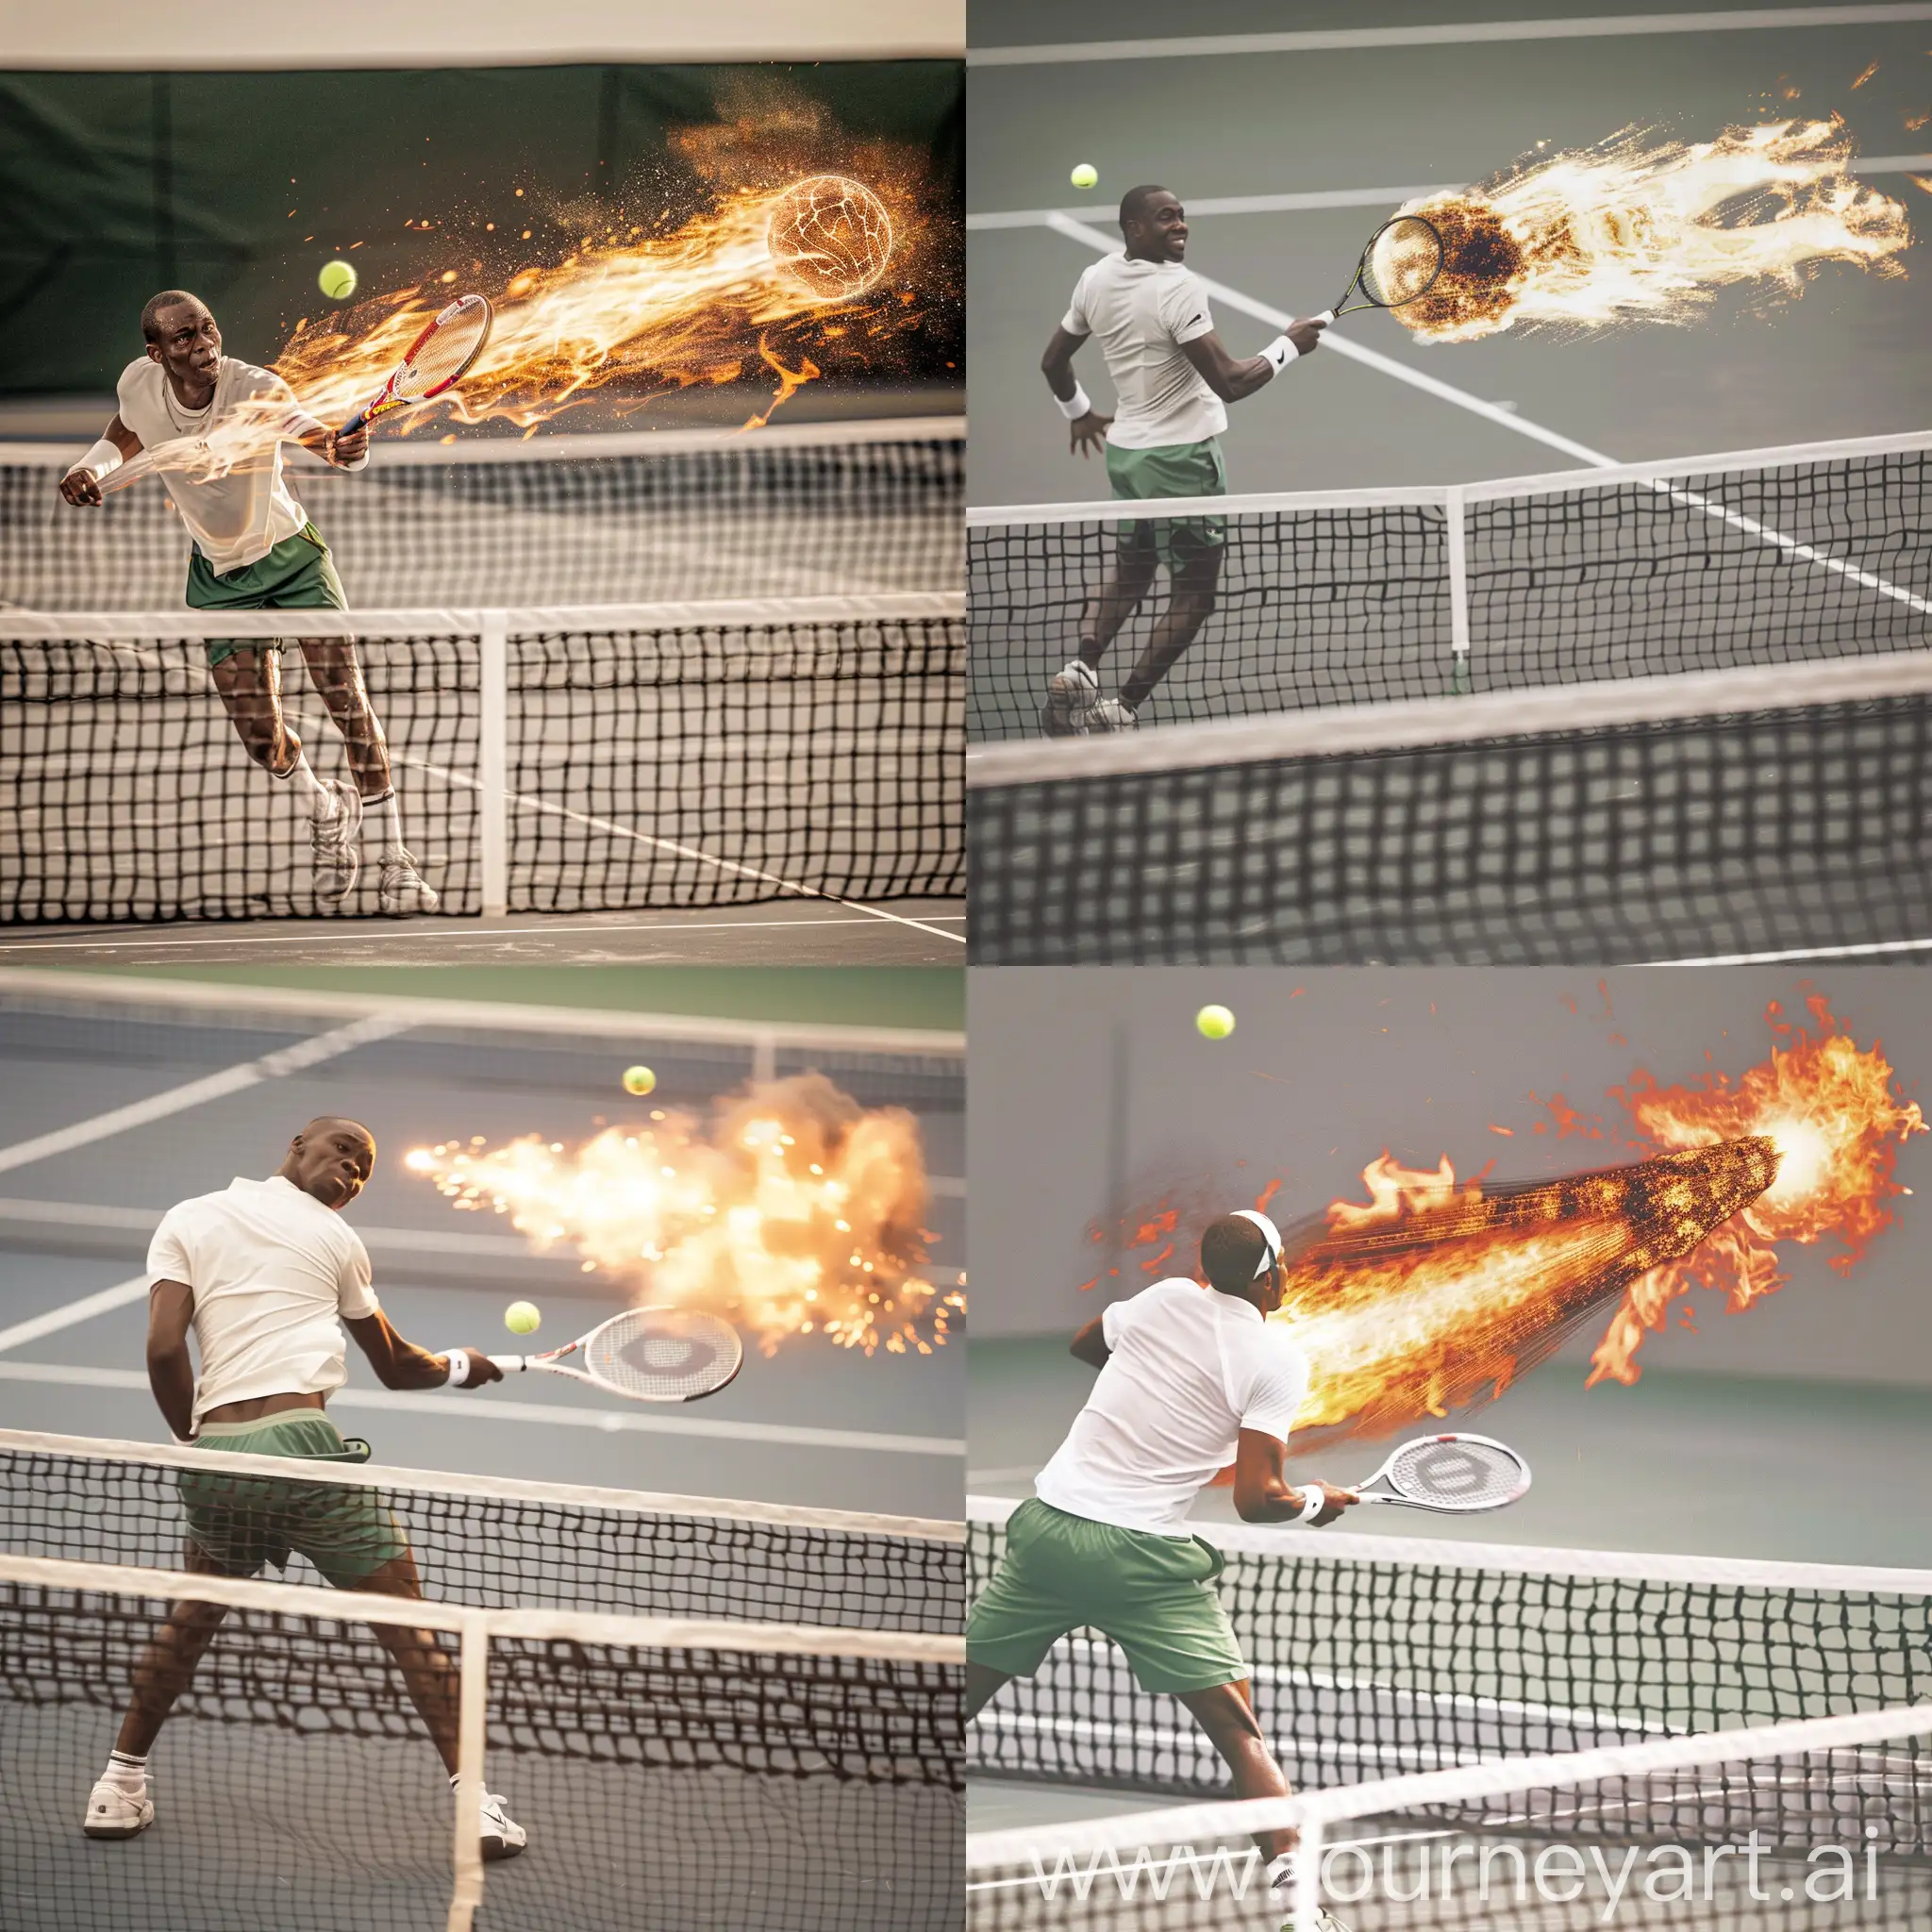 Create a surrealistic image of a Nigerian tennis player, wearing white over green shorts, hitting the tennis ball in a powerful serve, the ball flies off trailing fire like a meteor flying across the tennis court, over the net